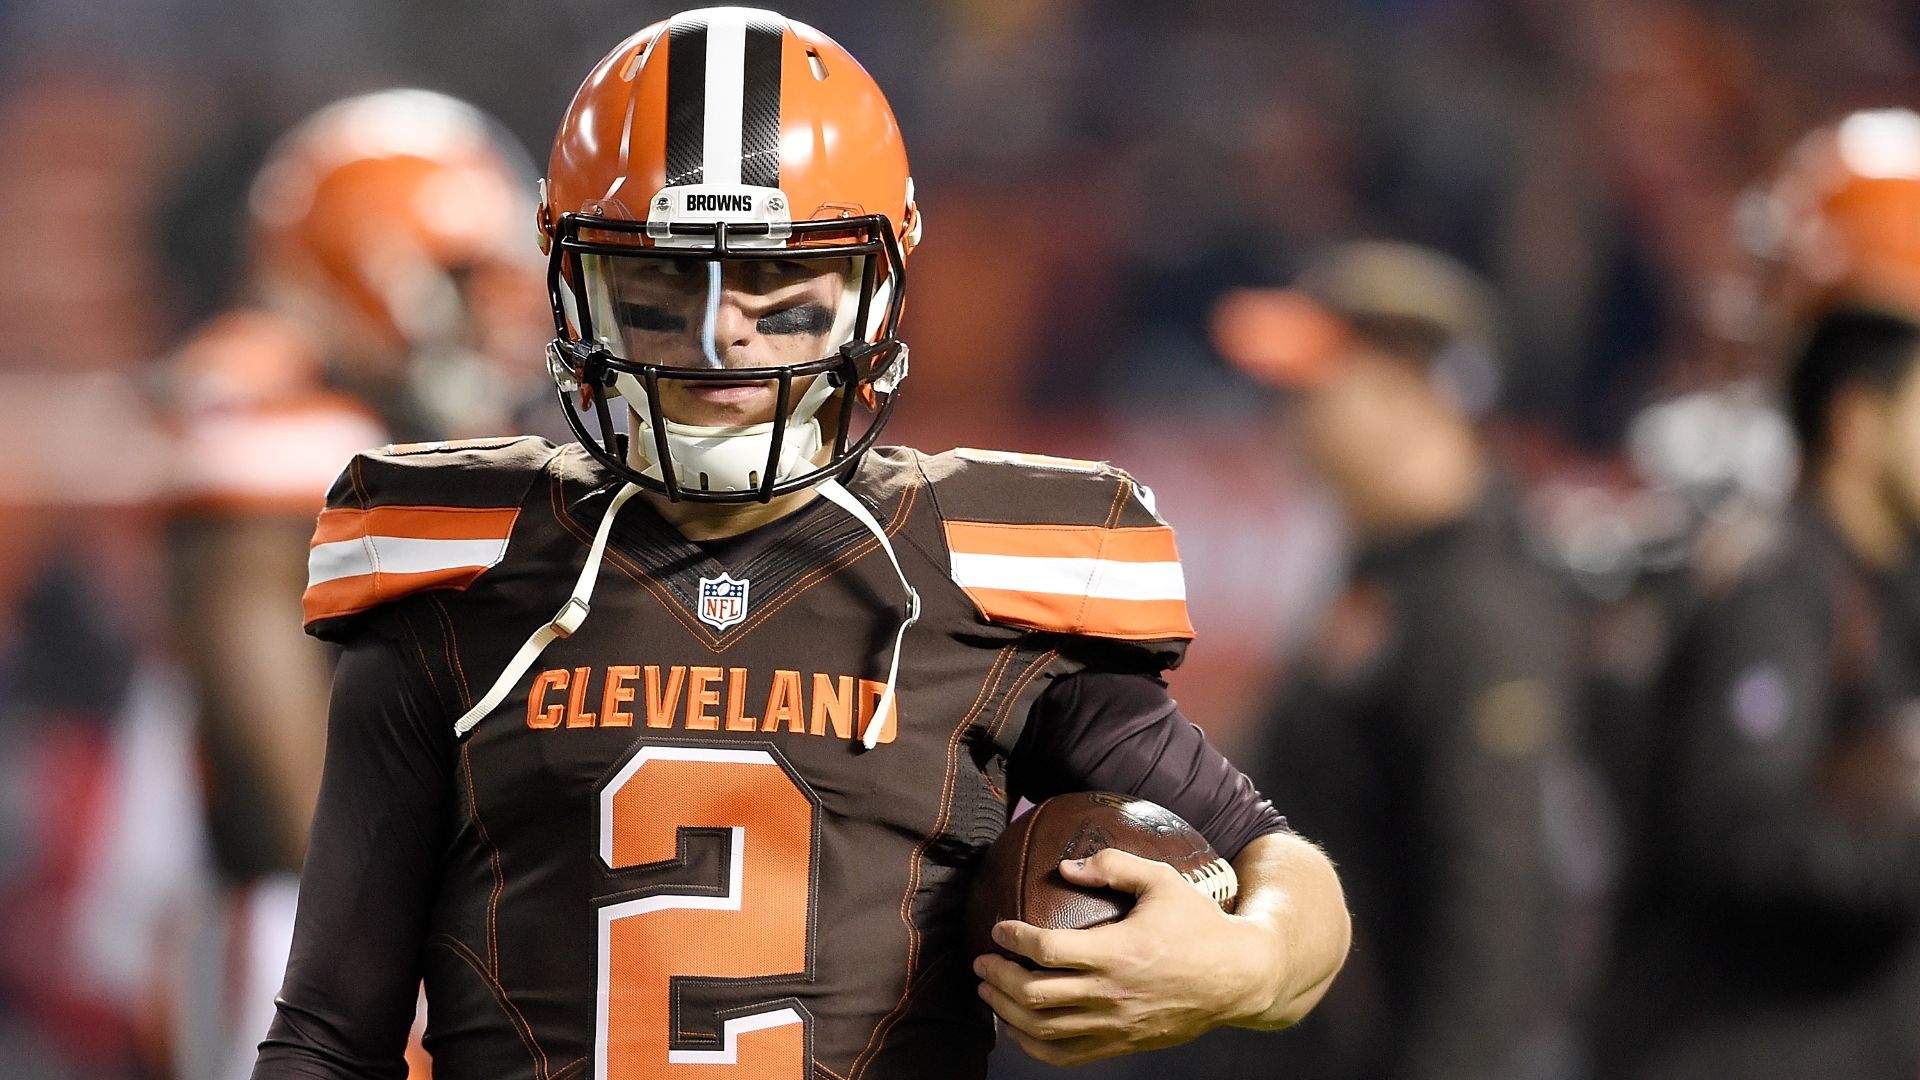 Manziel indicted in domestic violence case